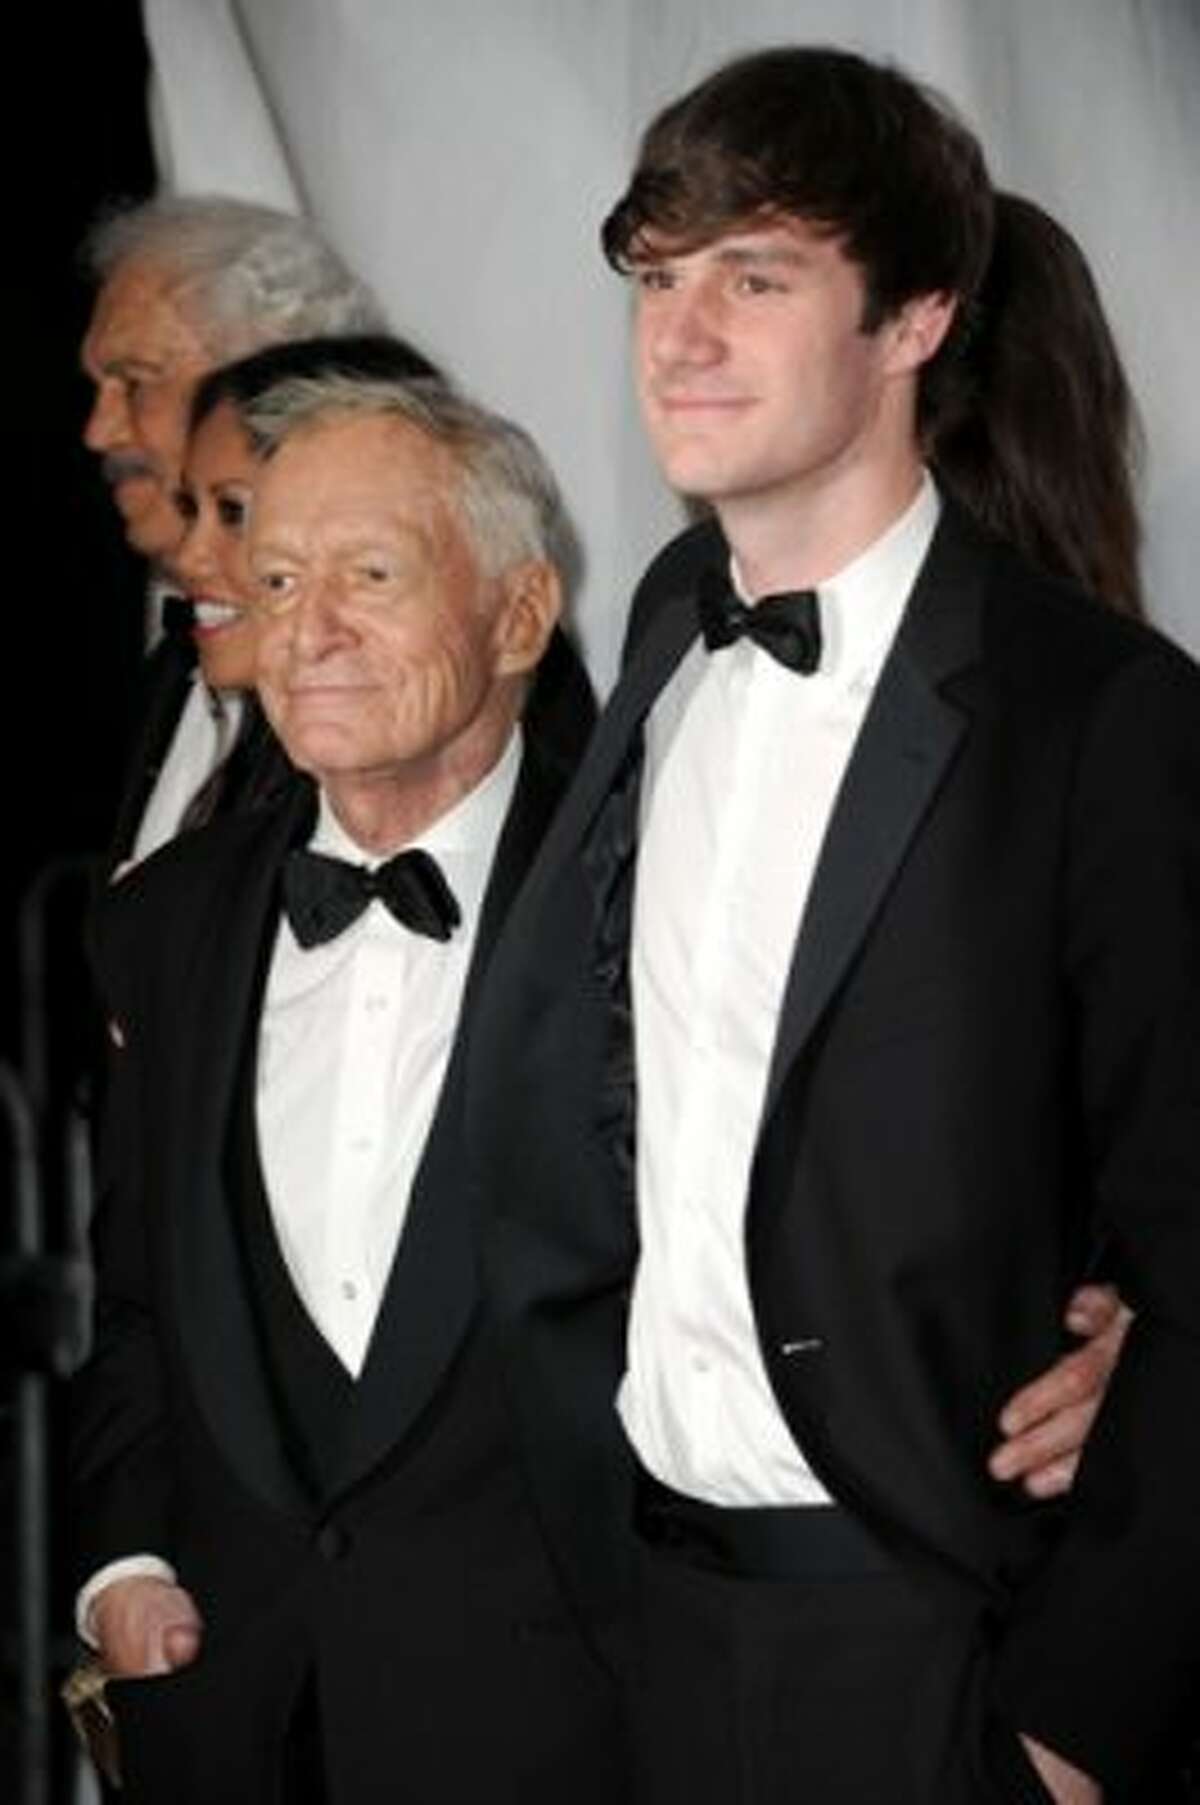 Hugh Hefner, left, and his son Cooper Hefner arrive at the 2012 MusiCares Person of the Year Tribute To Paul McCartney held at the Los Angeles Convention Center on Feb. 10, 2012, in Los Angeles. (Jason Merritt / Getty Images)